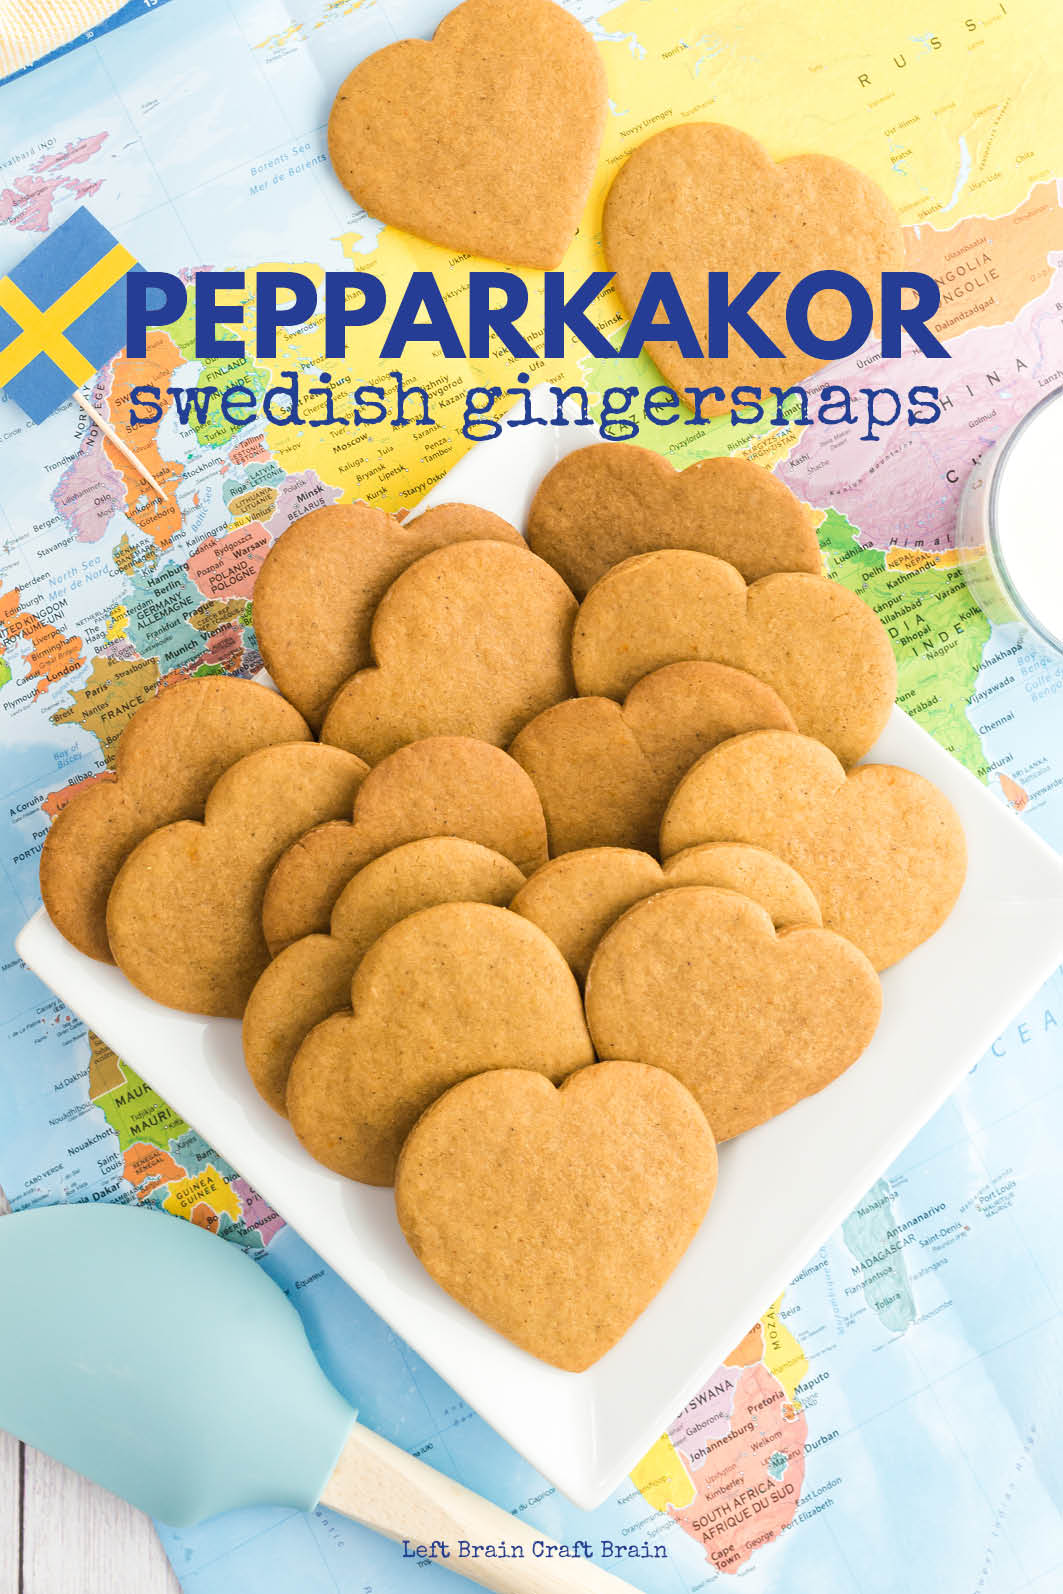 These crispy, sweet pepparkakor or Swedish gingersnap cookies have the perfect amount of spice. The gingernsnaps are perfect for Christmas / holiday giving or snacking any time of the year.